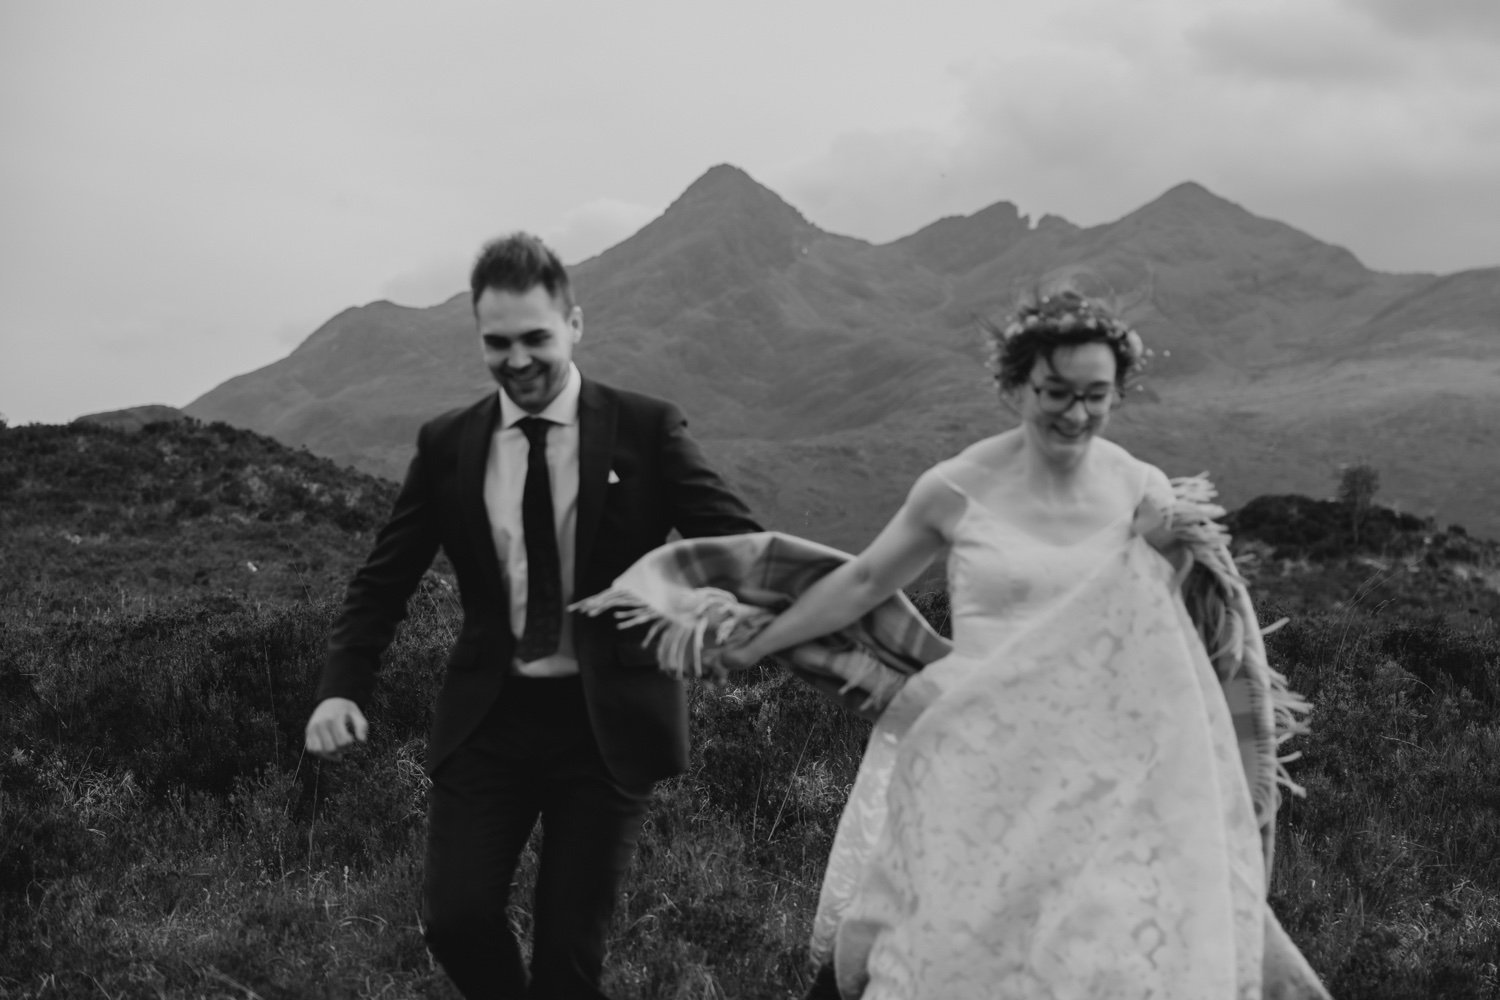 Isle of Skye Elopement Ceremony at the Fairy Pools — SCOTLAND ELOPEMENT CO.